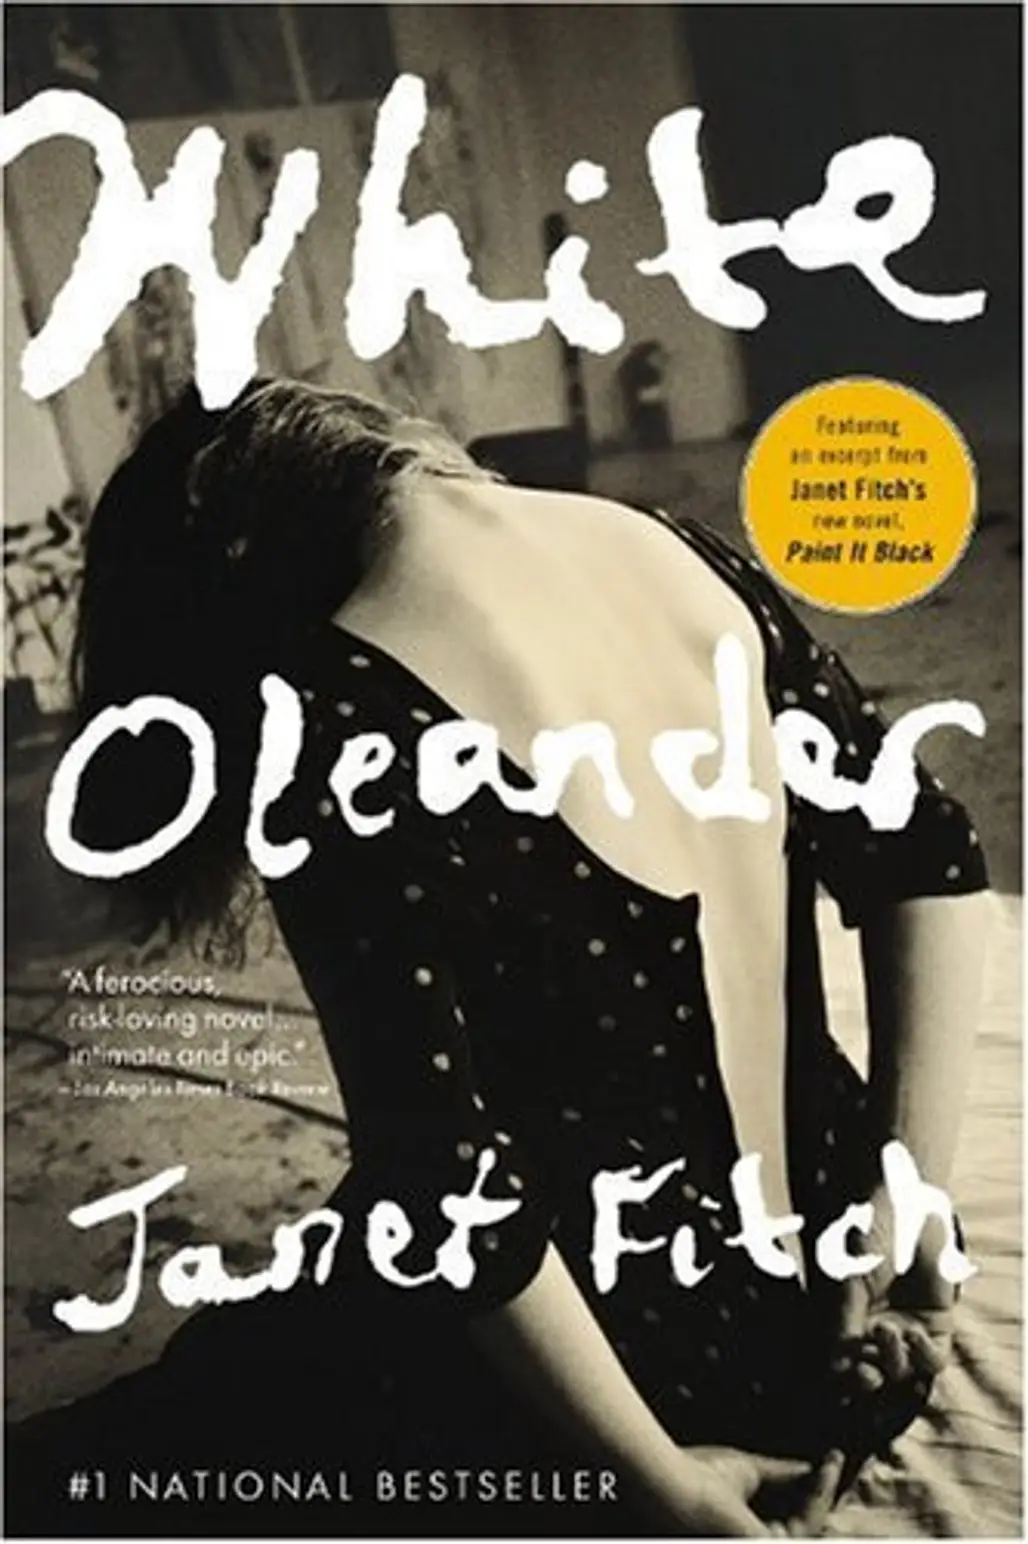 White Oleander by Janet Fitch